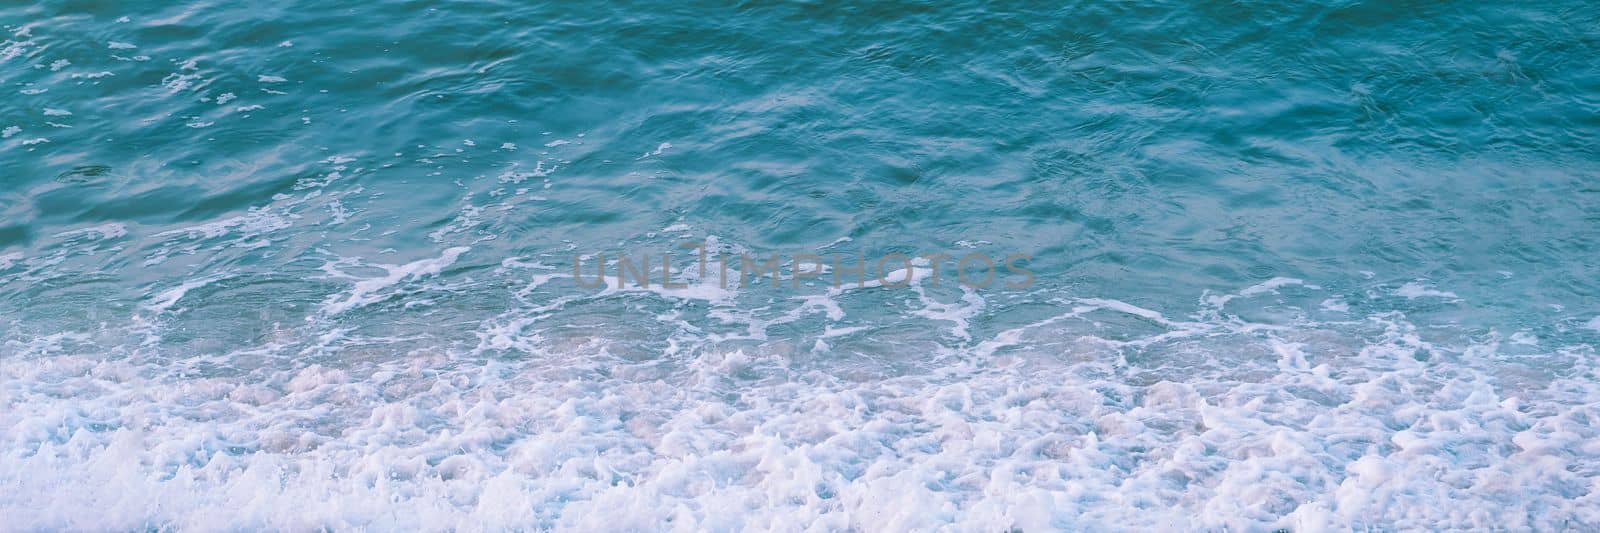 Abstract nature background Sea rippled water surface texture edge wallpaper White foam blue green turquoise.